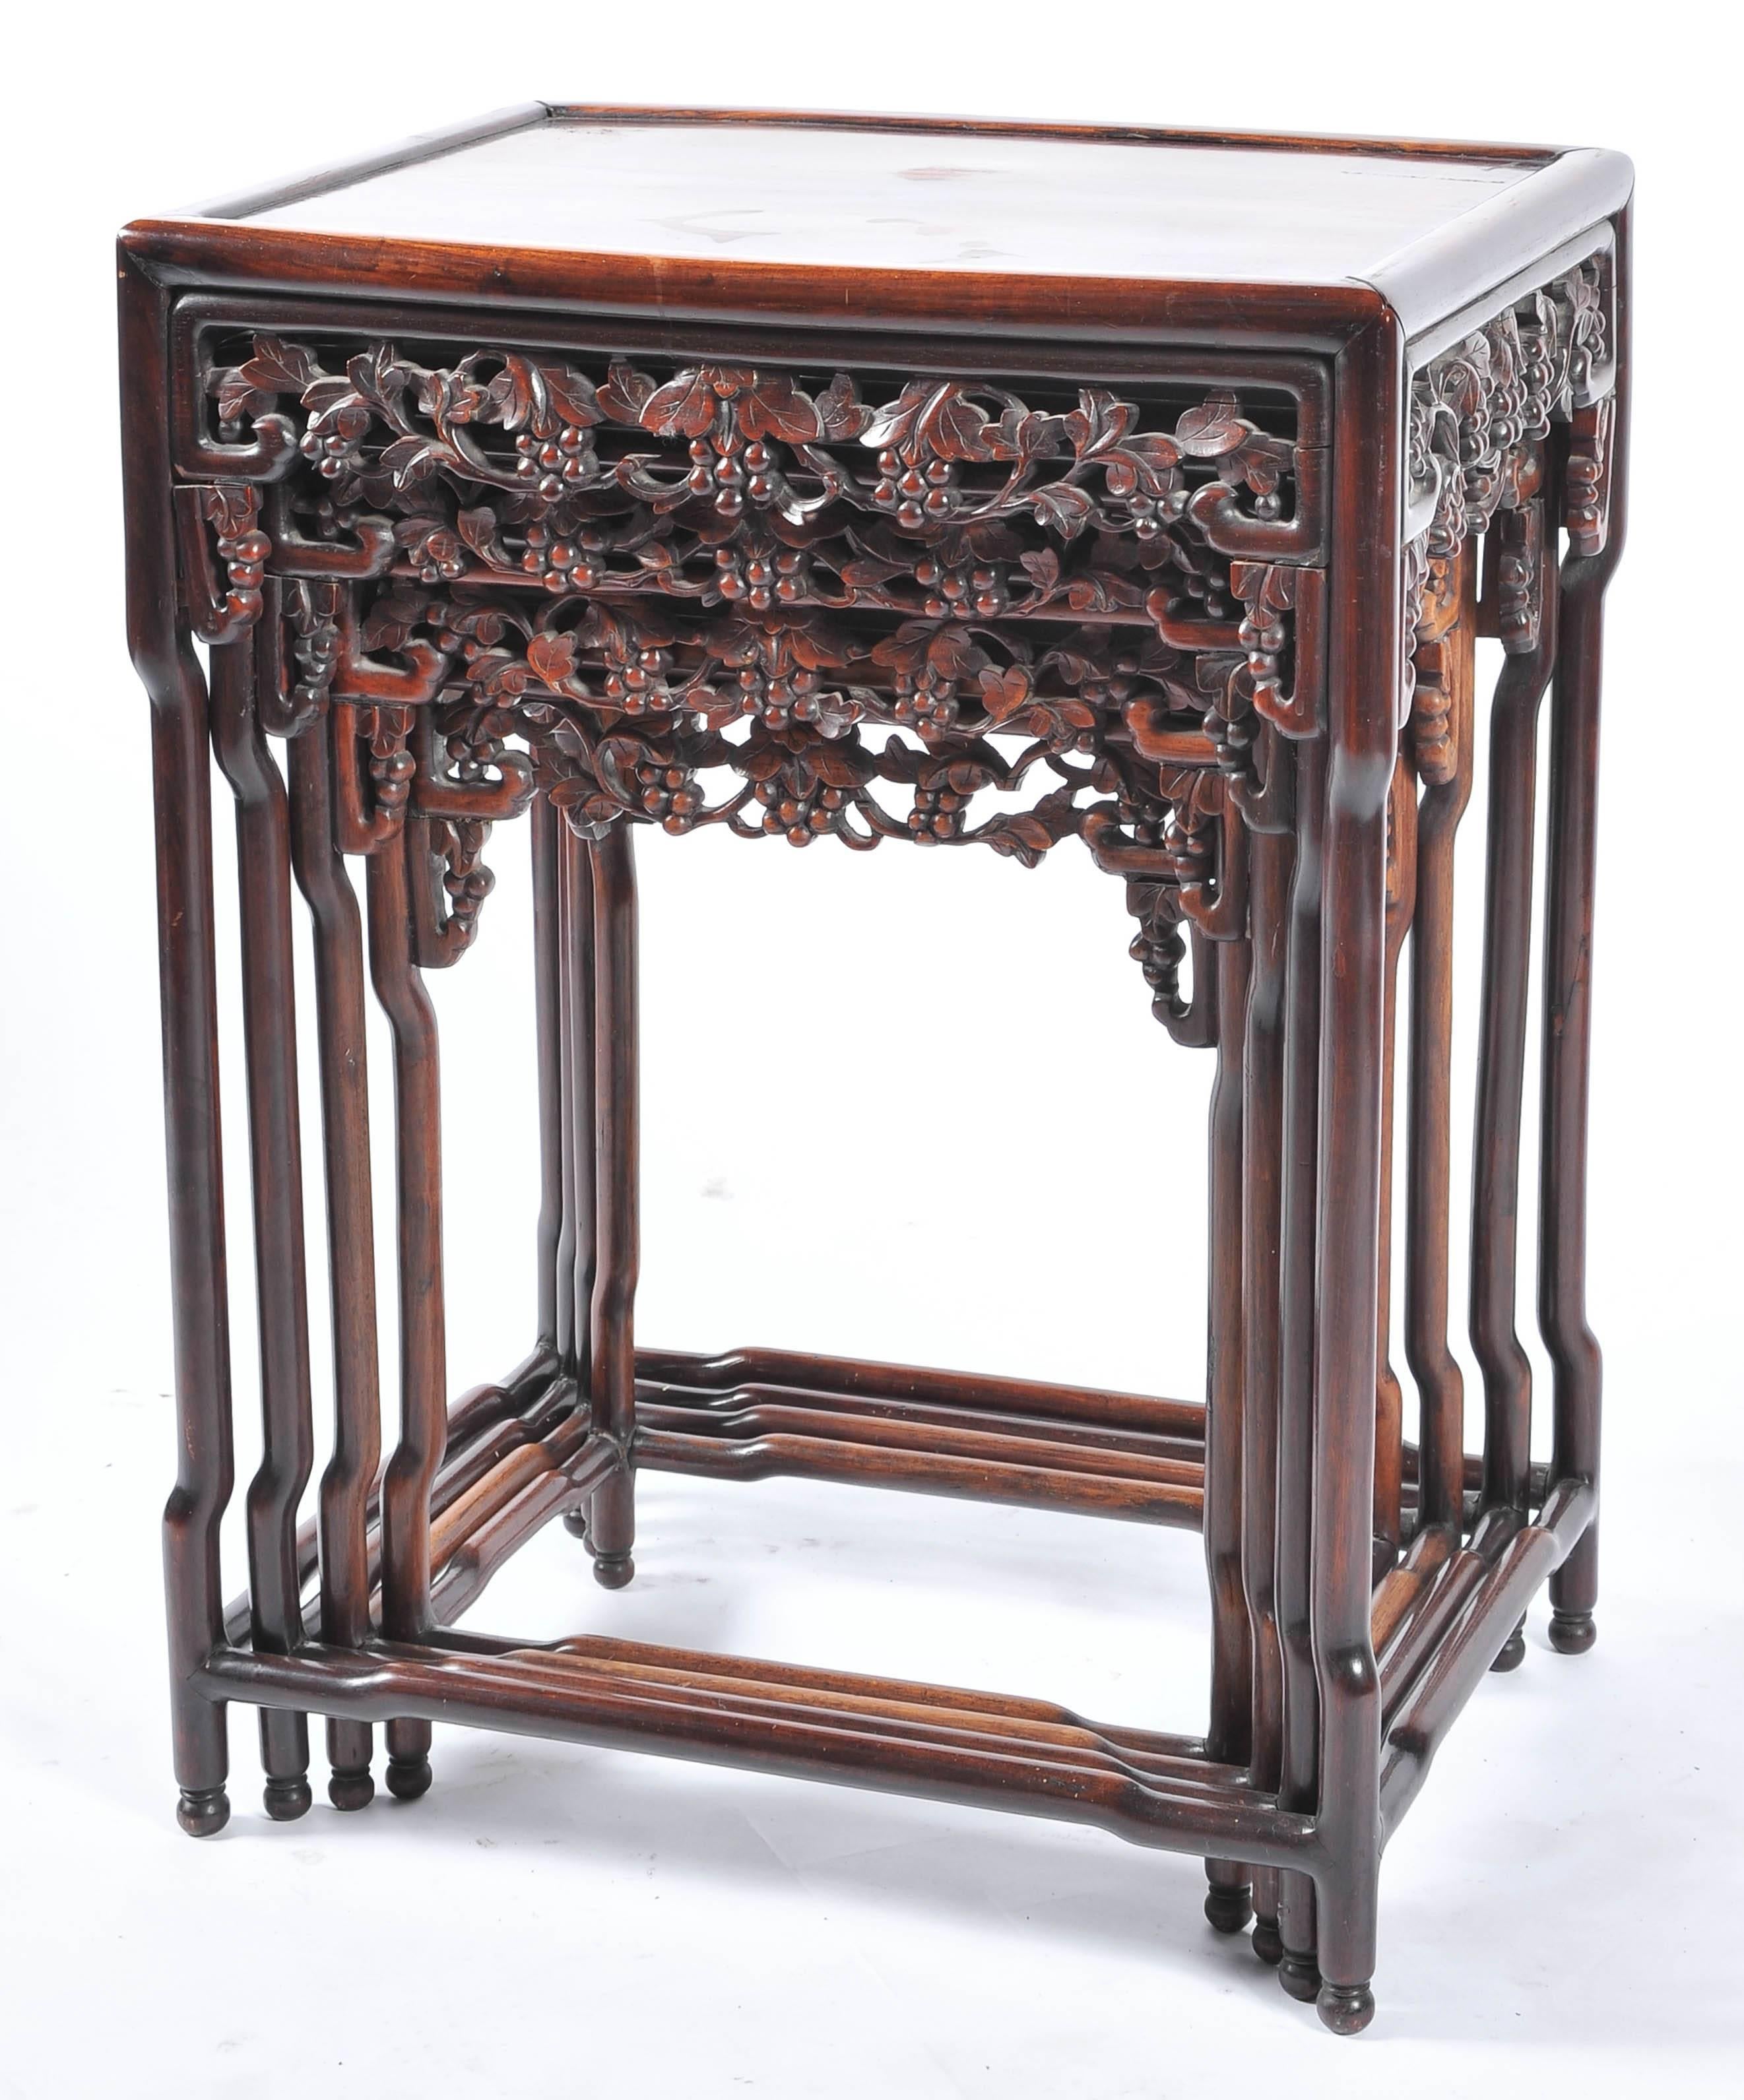 A good quality nest of four Chinese hardwood tables, each having carved and fret work frieze panels of leaves and grapes and raised on four turned legs, united by stretchers.